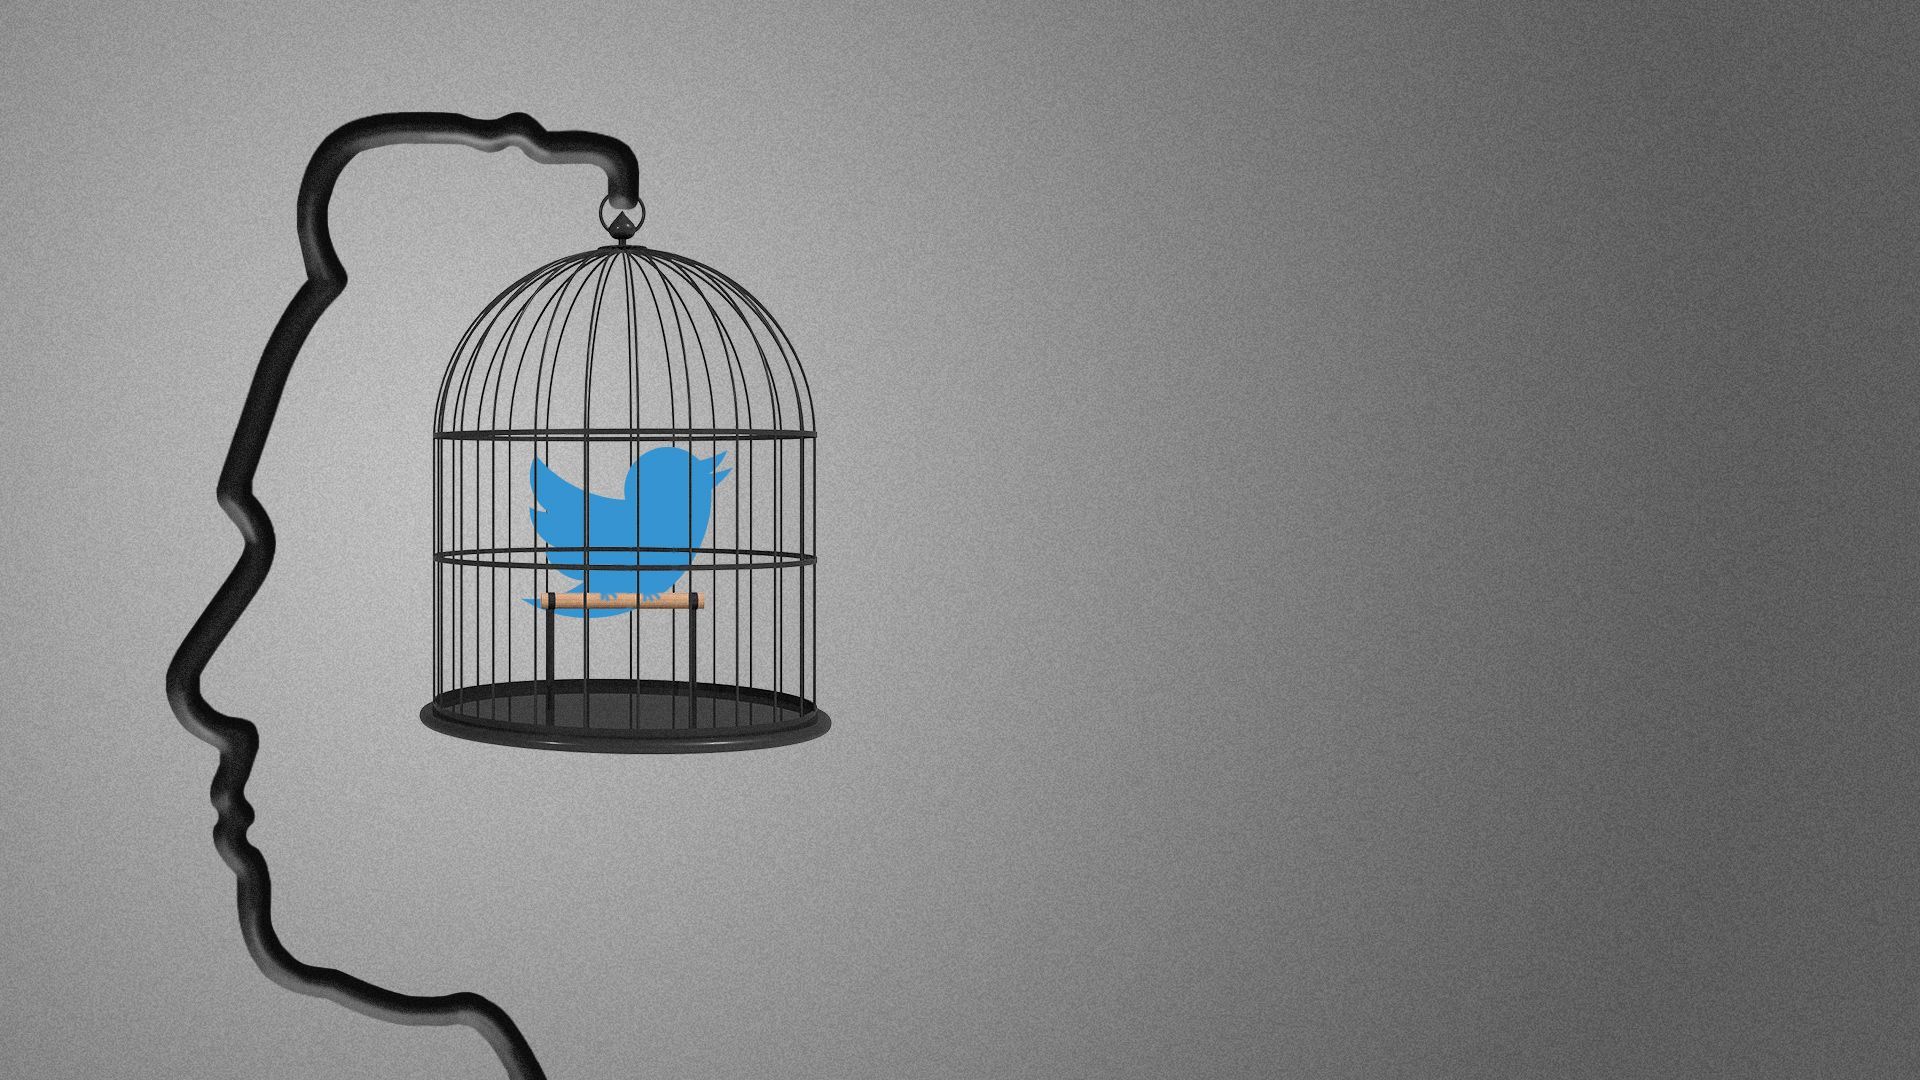 Illustration of a bird cage with the Twitter logo inside being held up by a cage carrier in the shape of Elon Musk's face.